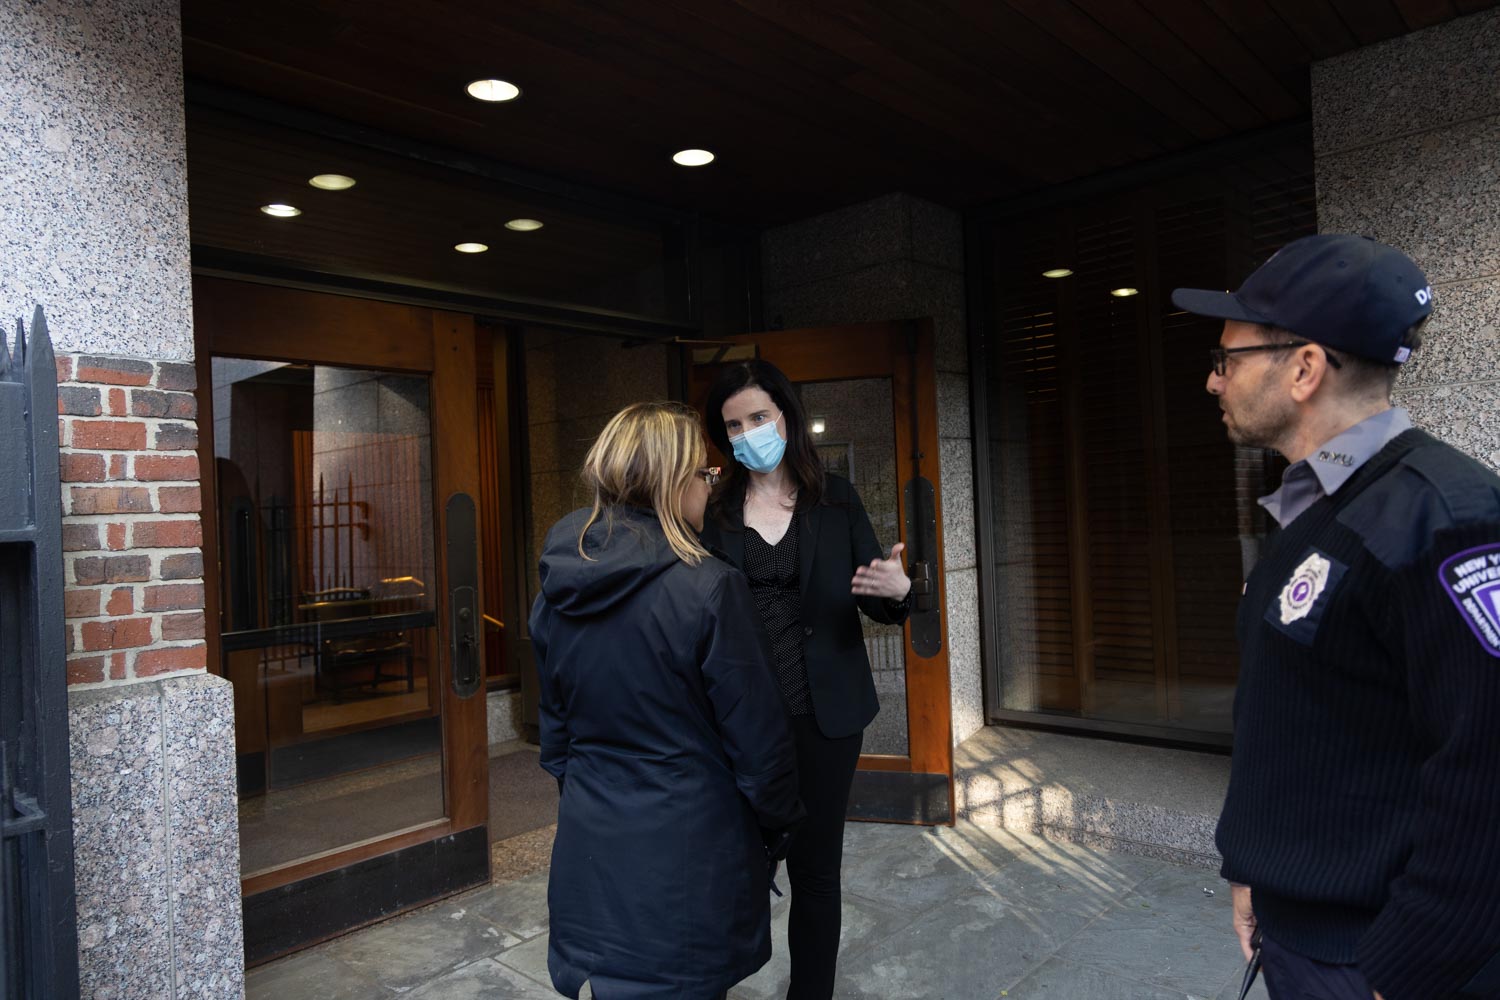 Michelle Cherande, dressed in all black and wearing a mask, speaks to a woman outside the D'Agostino Hall.